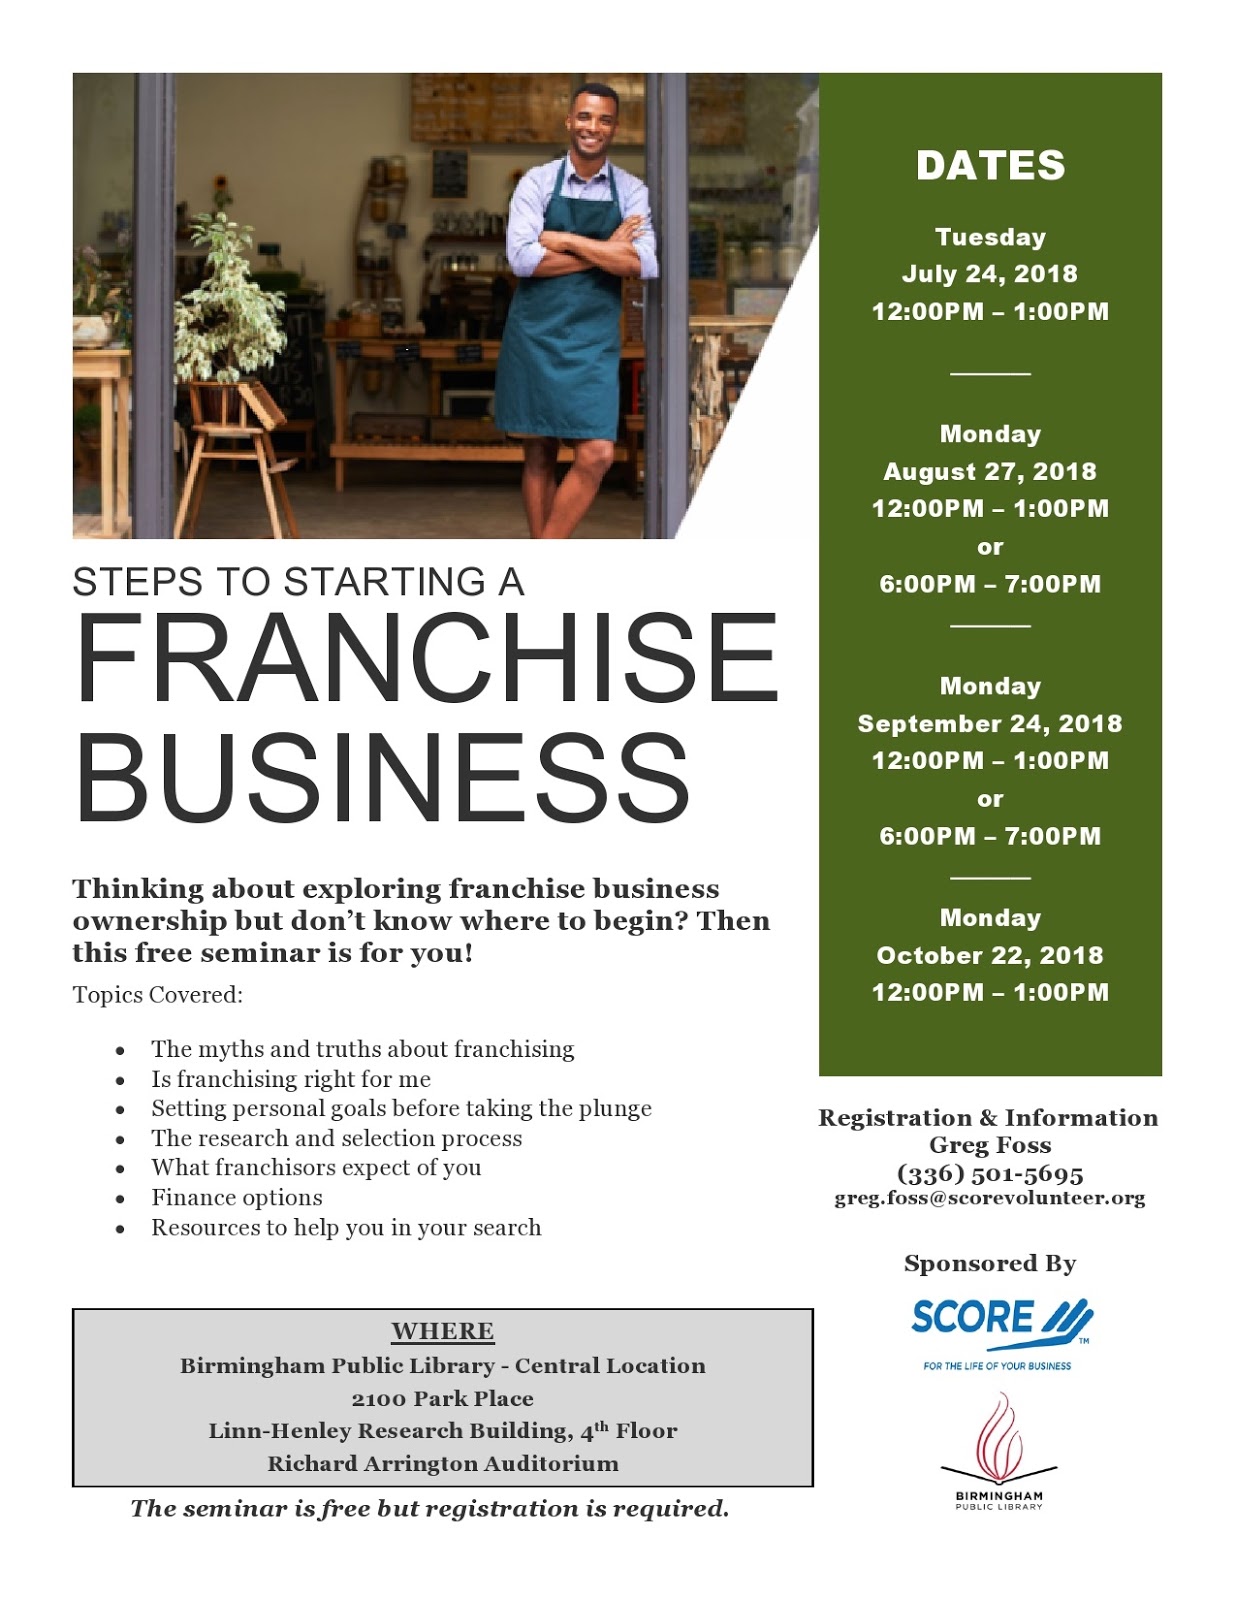 Steps To Starting A Franchise Business Seminars Offered At Noon Evening On September 24 At Central Library - birmingham public library roblox is it safe